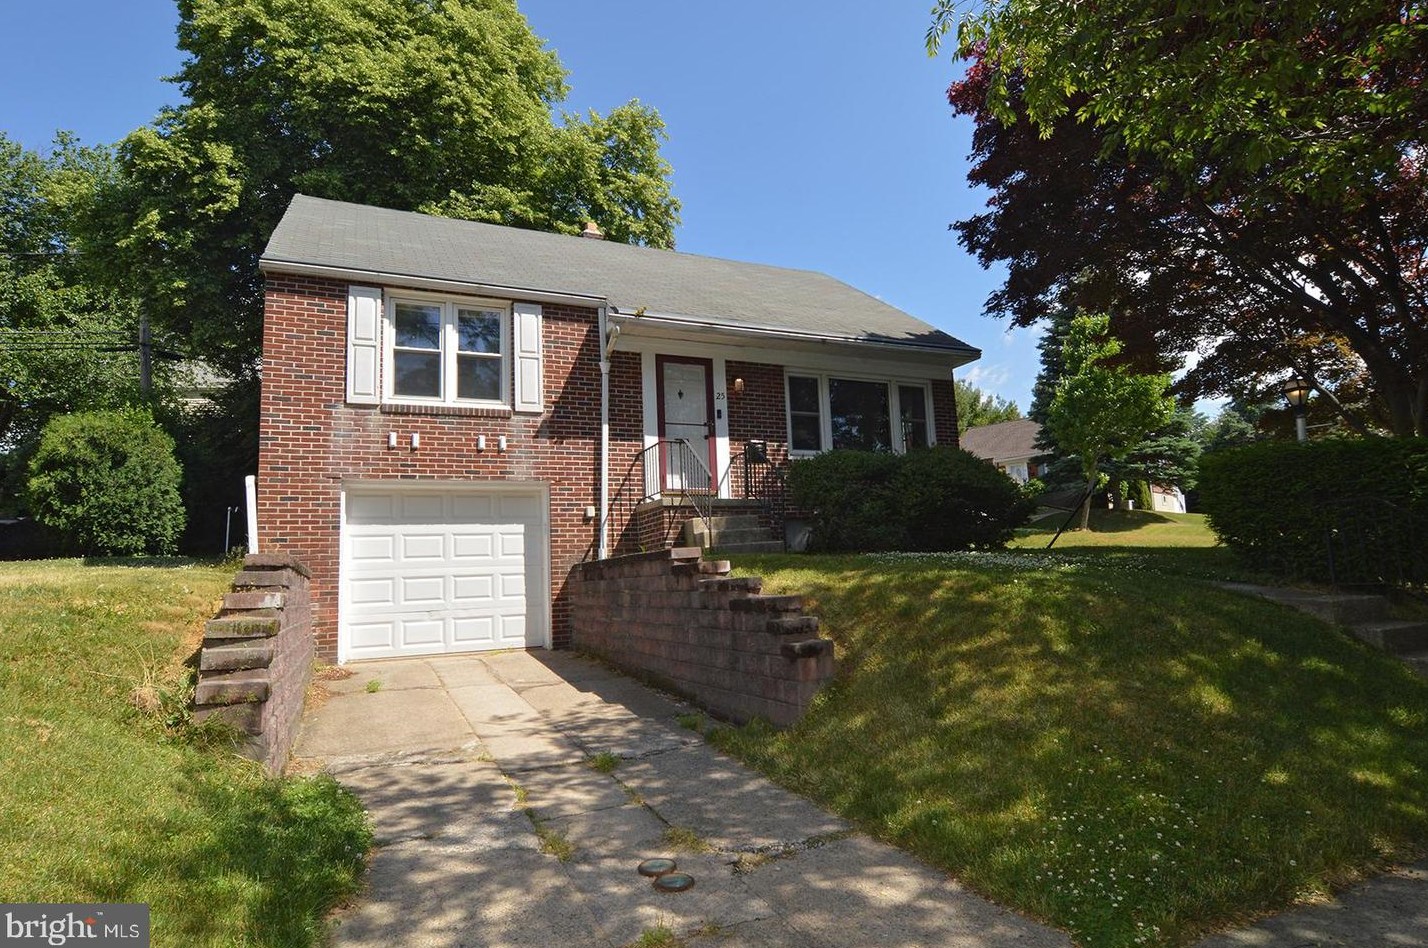 25 Park Rd, Reading, PA 19609